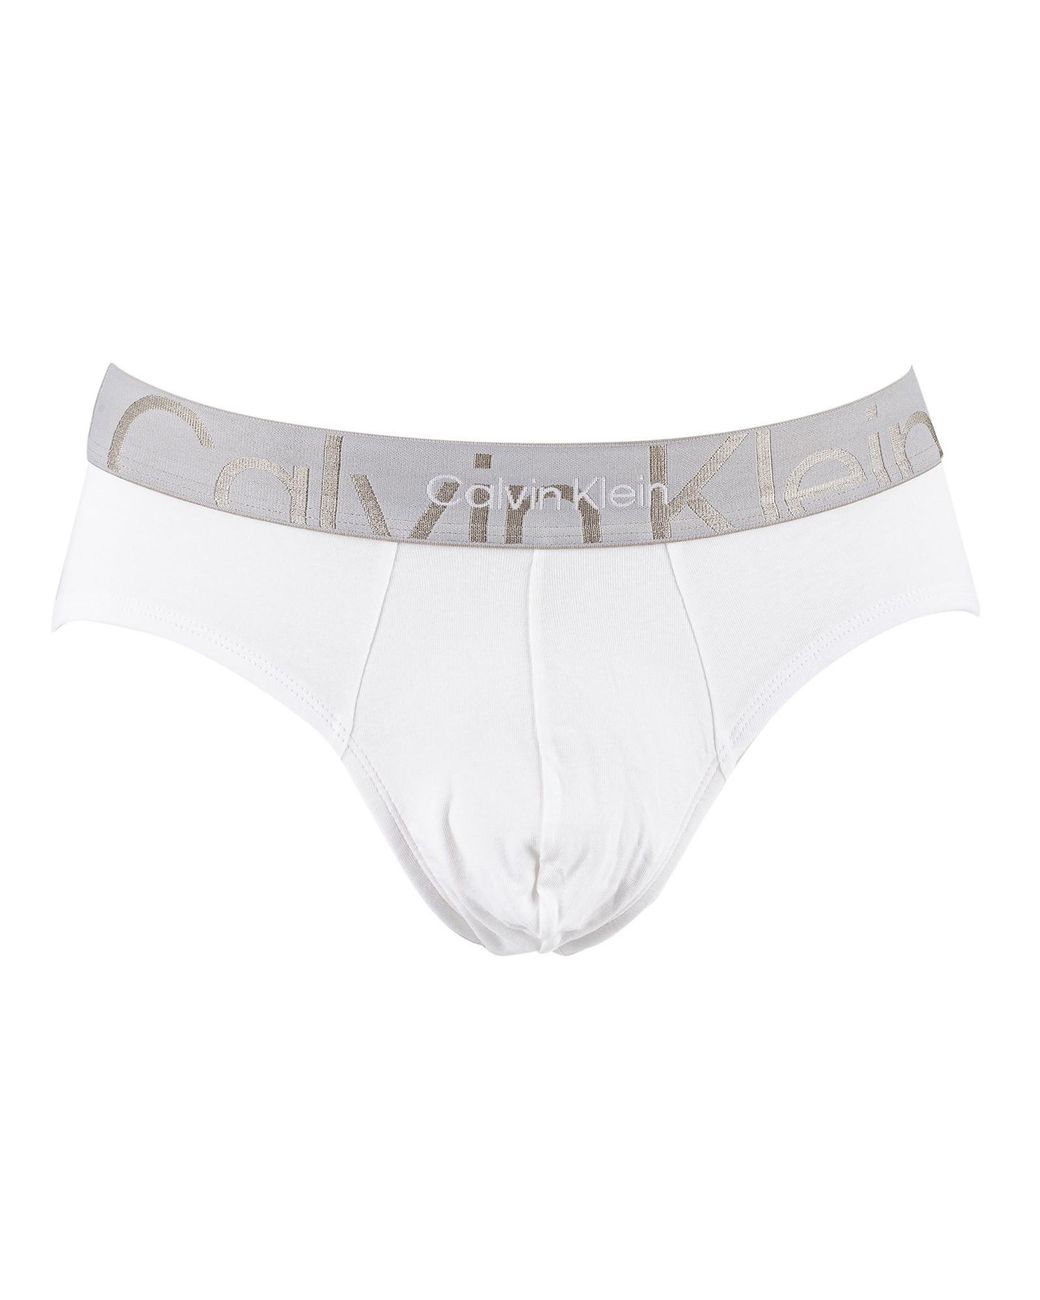 Calvin Klein EMBOSSED ICON CK thong knickers Briefs knickers